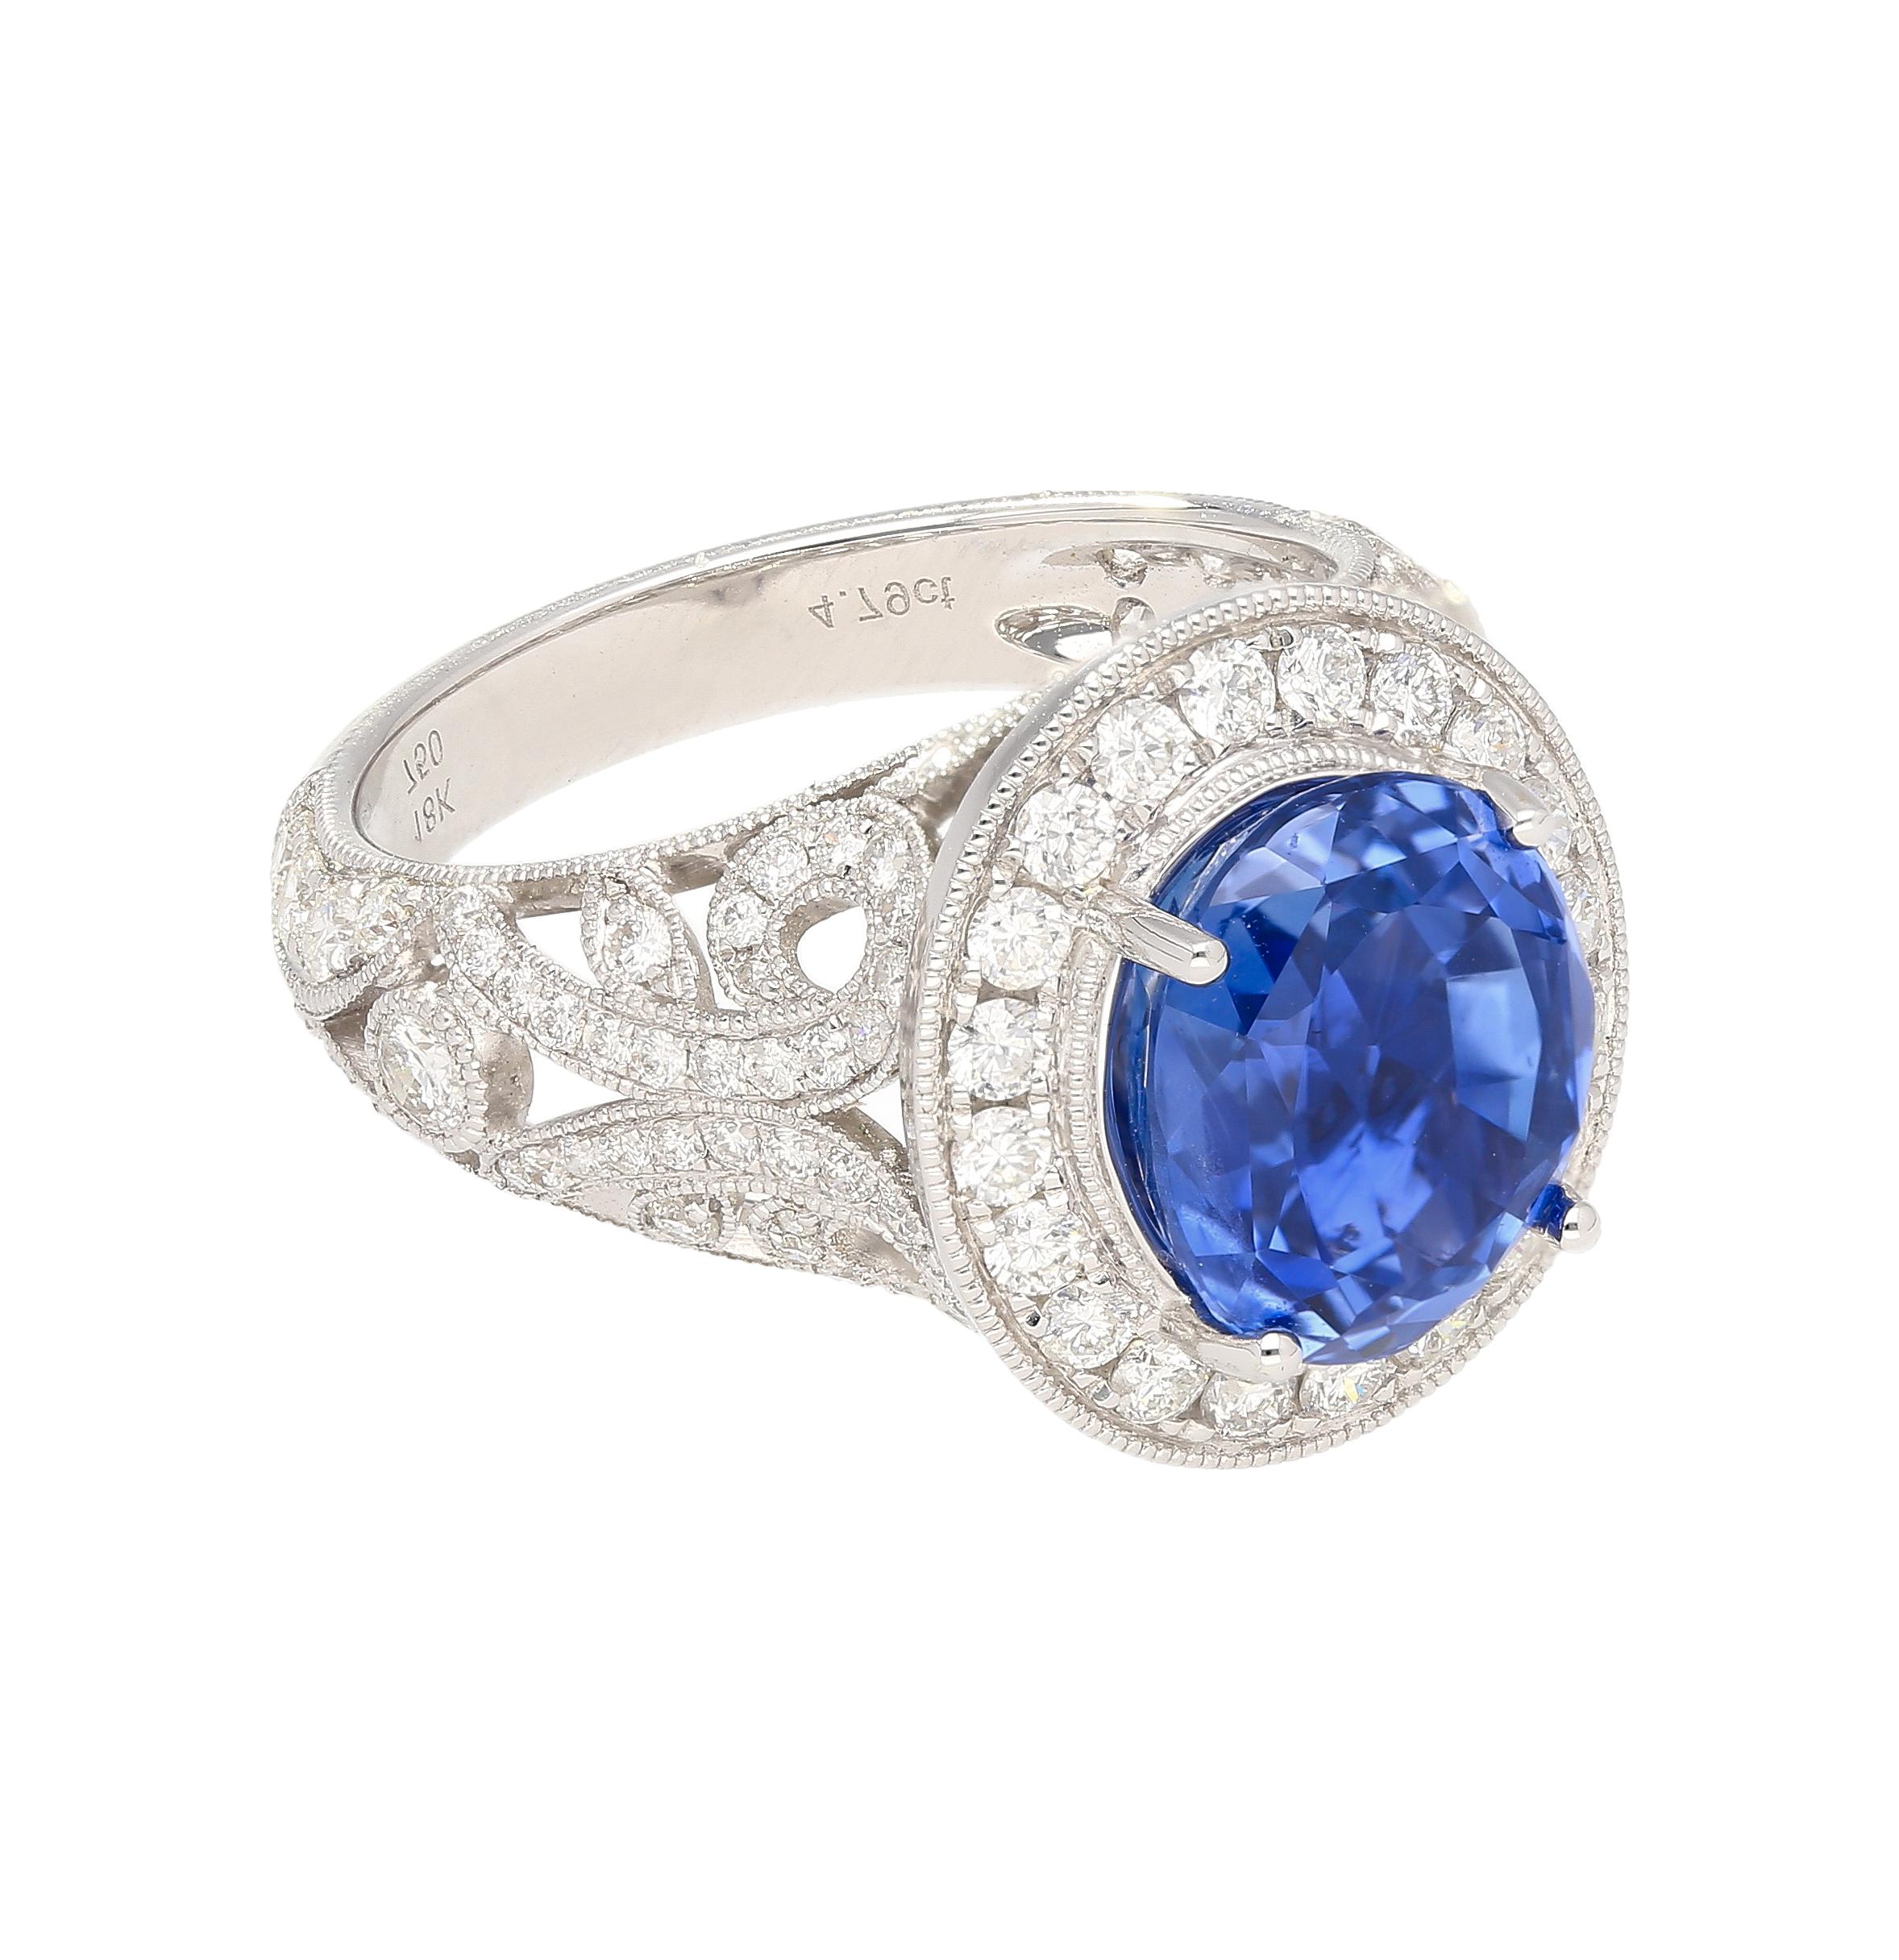 No Heat 4.84 Carat Violet-Blue Ceylon Sapphire with Diamonds in 18K Gold Ring For Sale 1